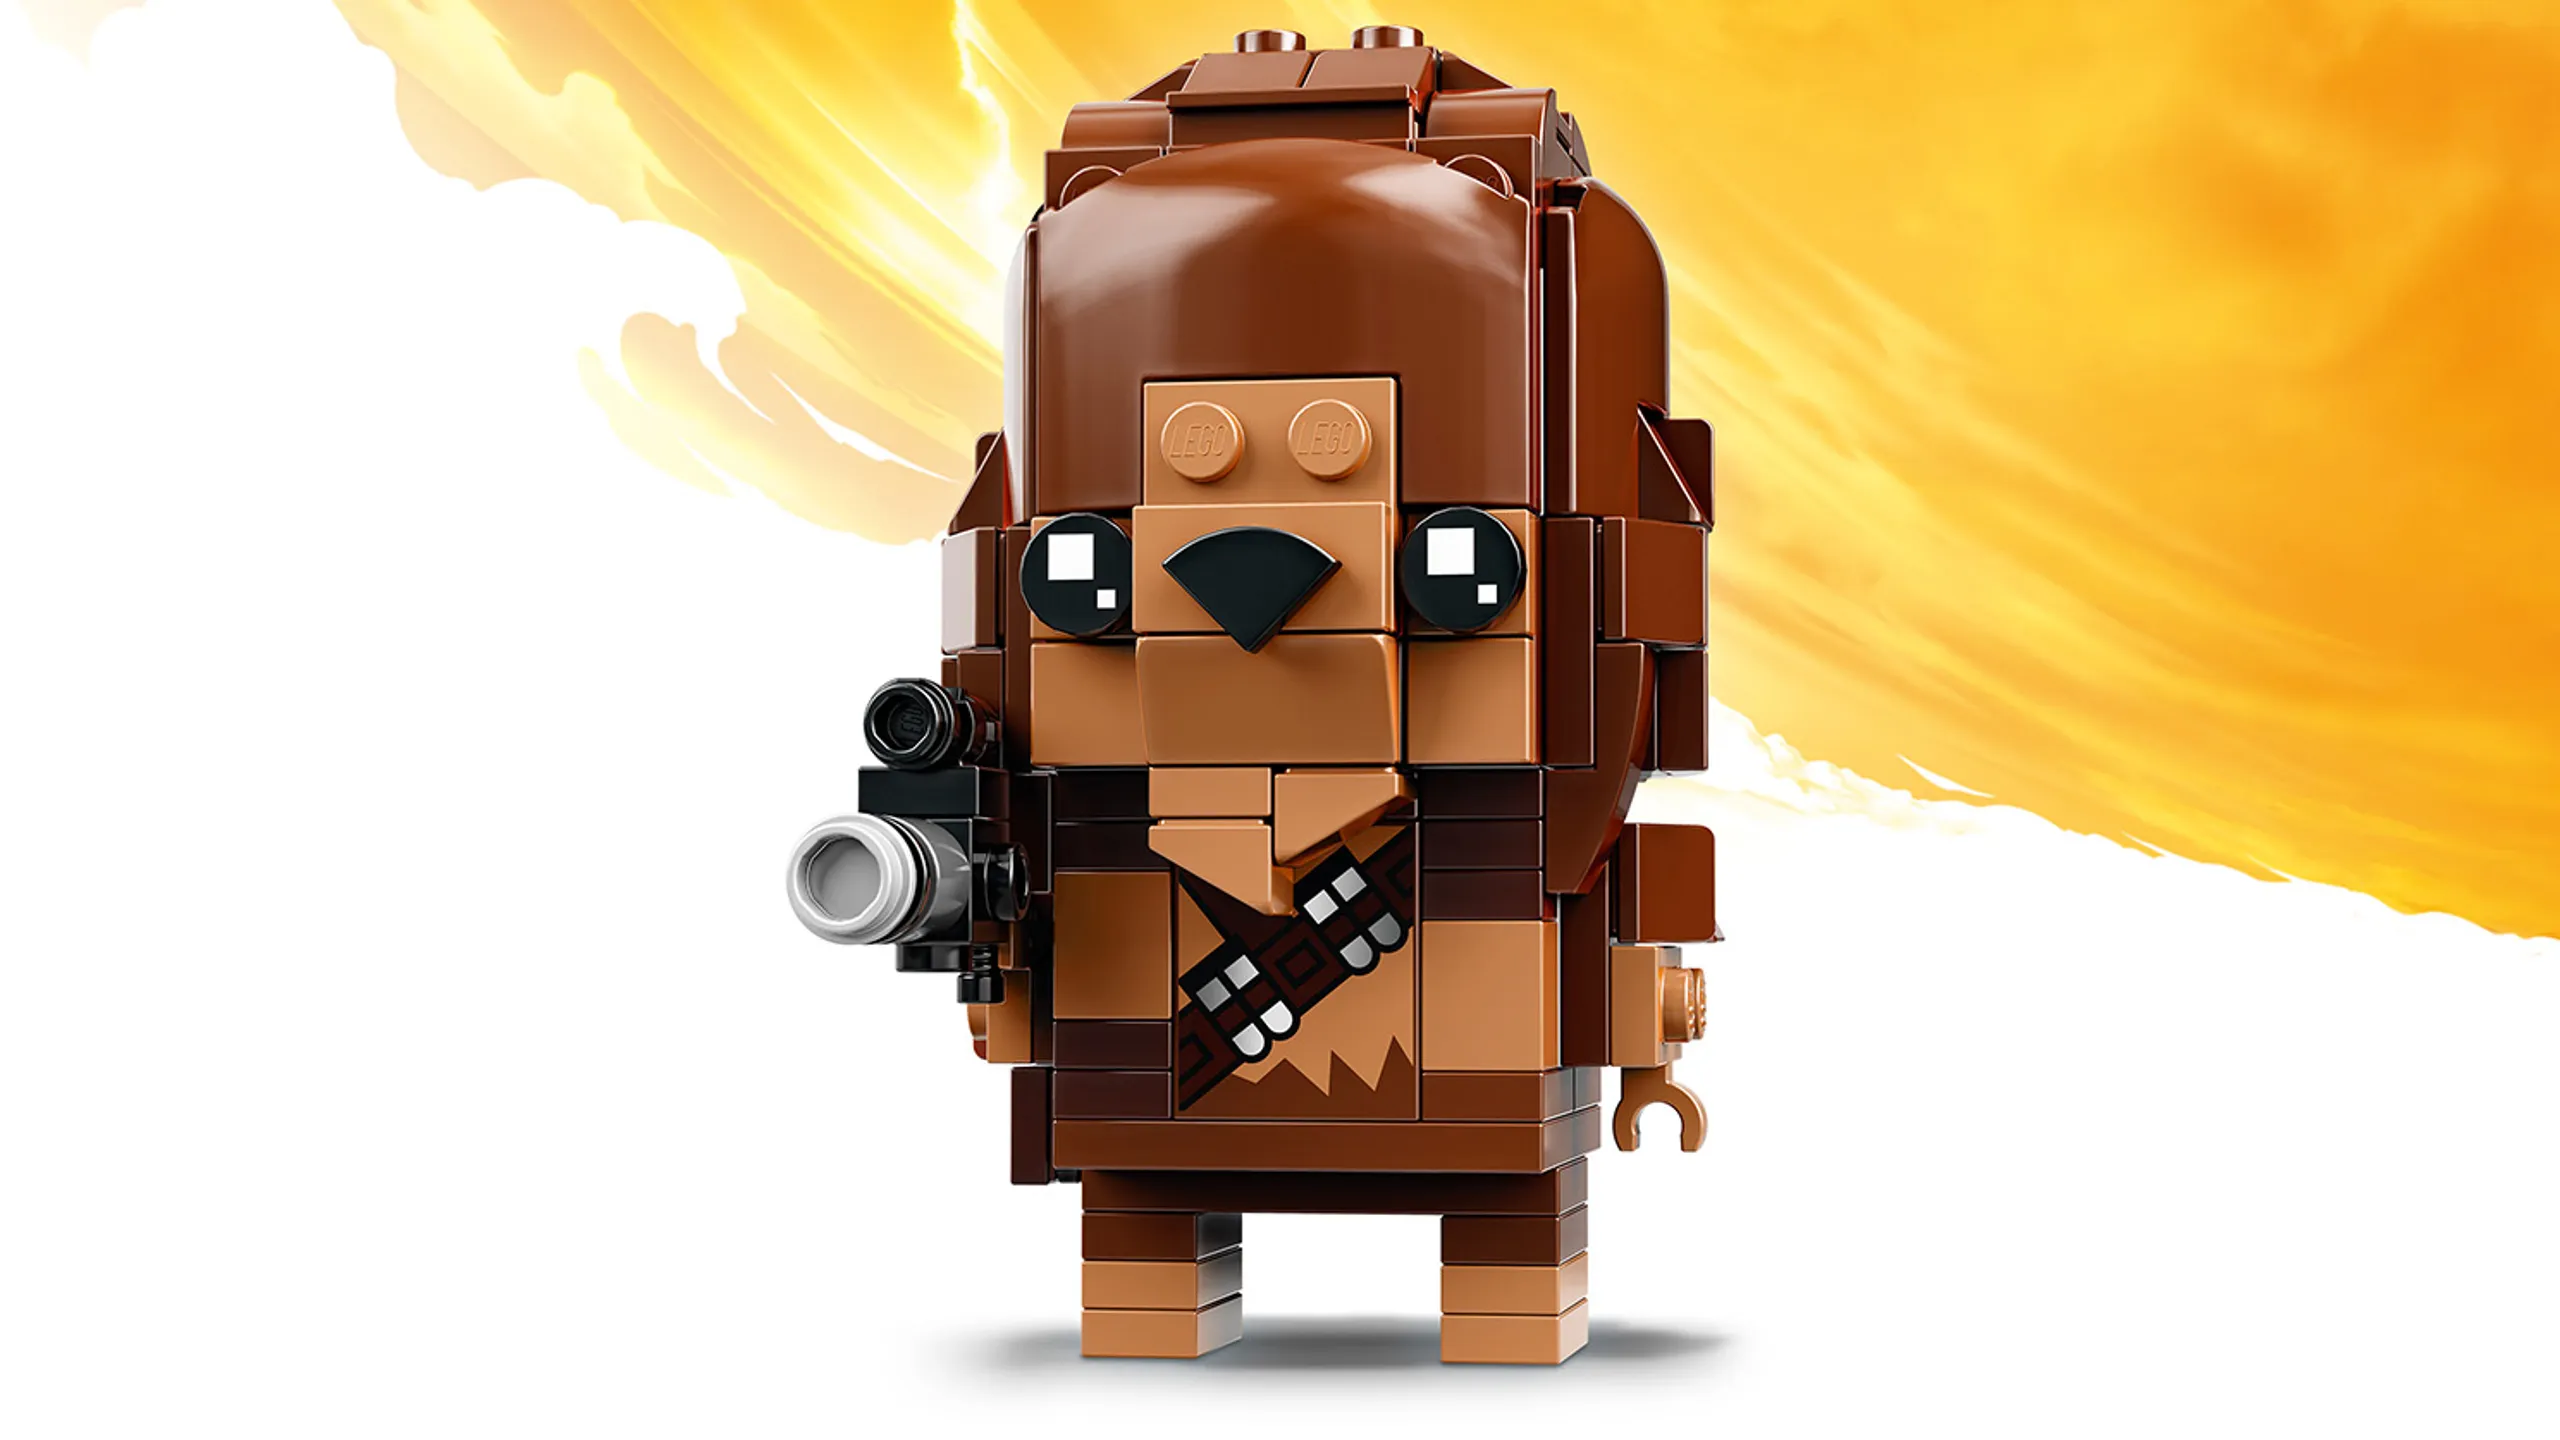 LEGO Brickheadz - 41609 Chewbacca - Build a LEGO Brickheadz figure of Chewbacca from the Star Wars saga. Check out his iconic matted fur, ammunition belt and blaster.